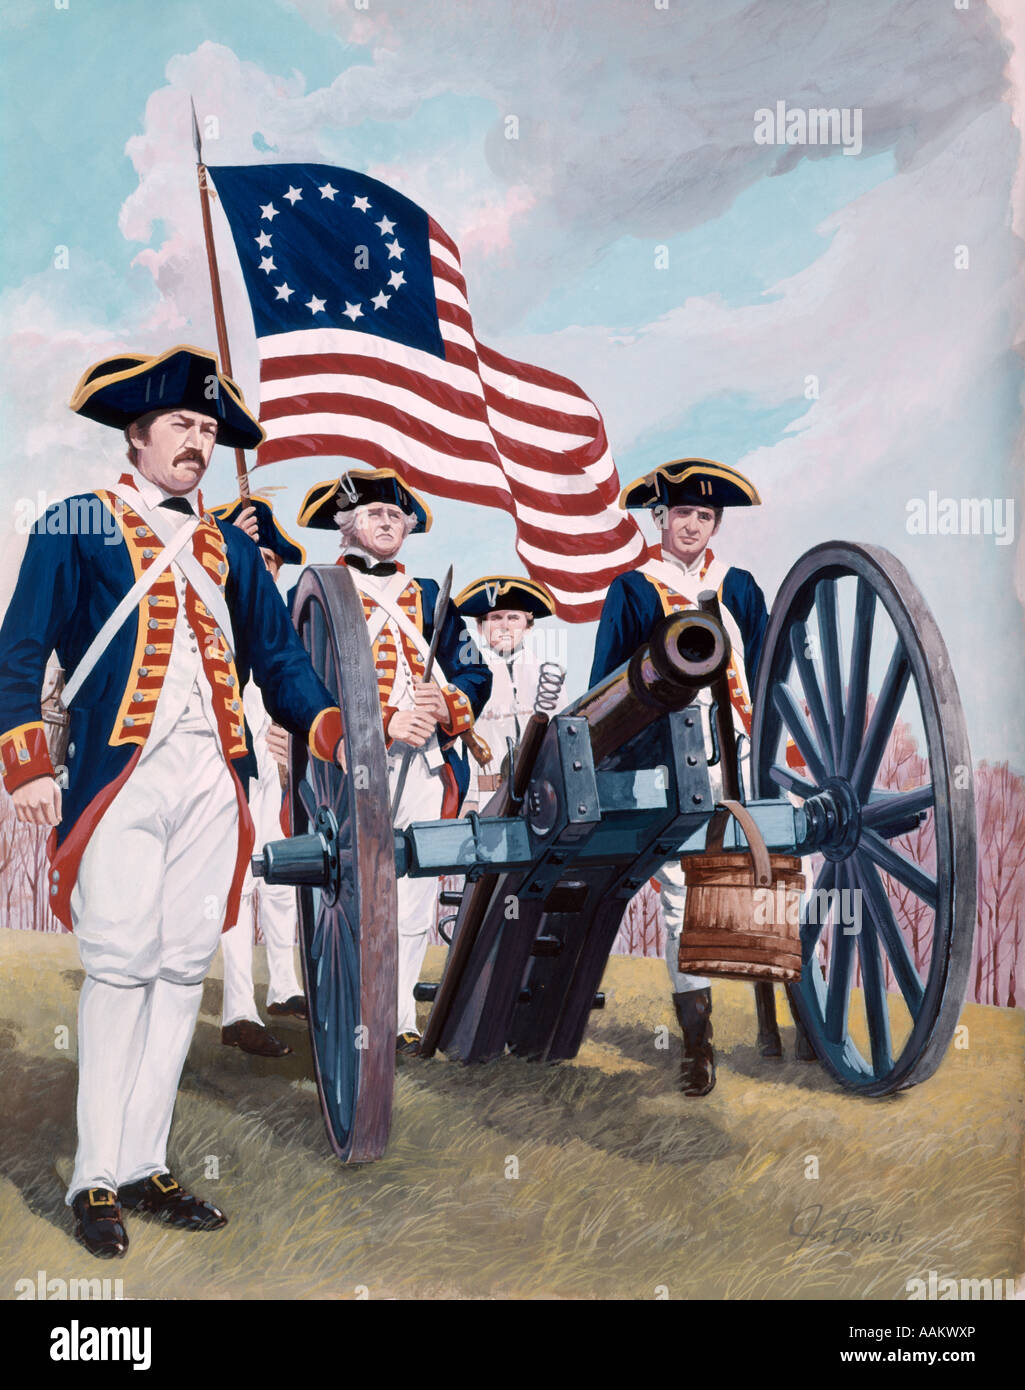 PAINTING ILLUSTRATION OF ARTILLERY CANNON CREW OF SOLDIERS MEN AMERICAN REVOLUTION 1776 TRICORN HAT UNIFORM FLAG Stock Photo